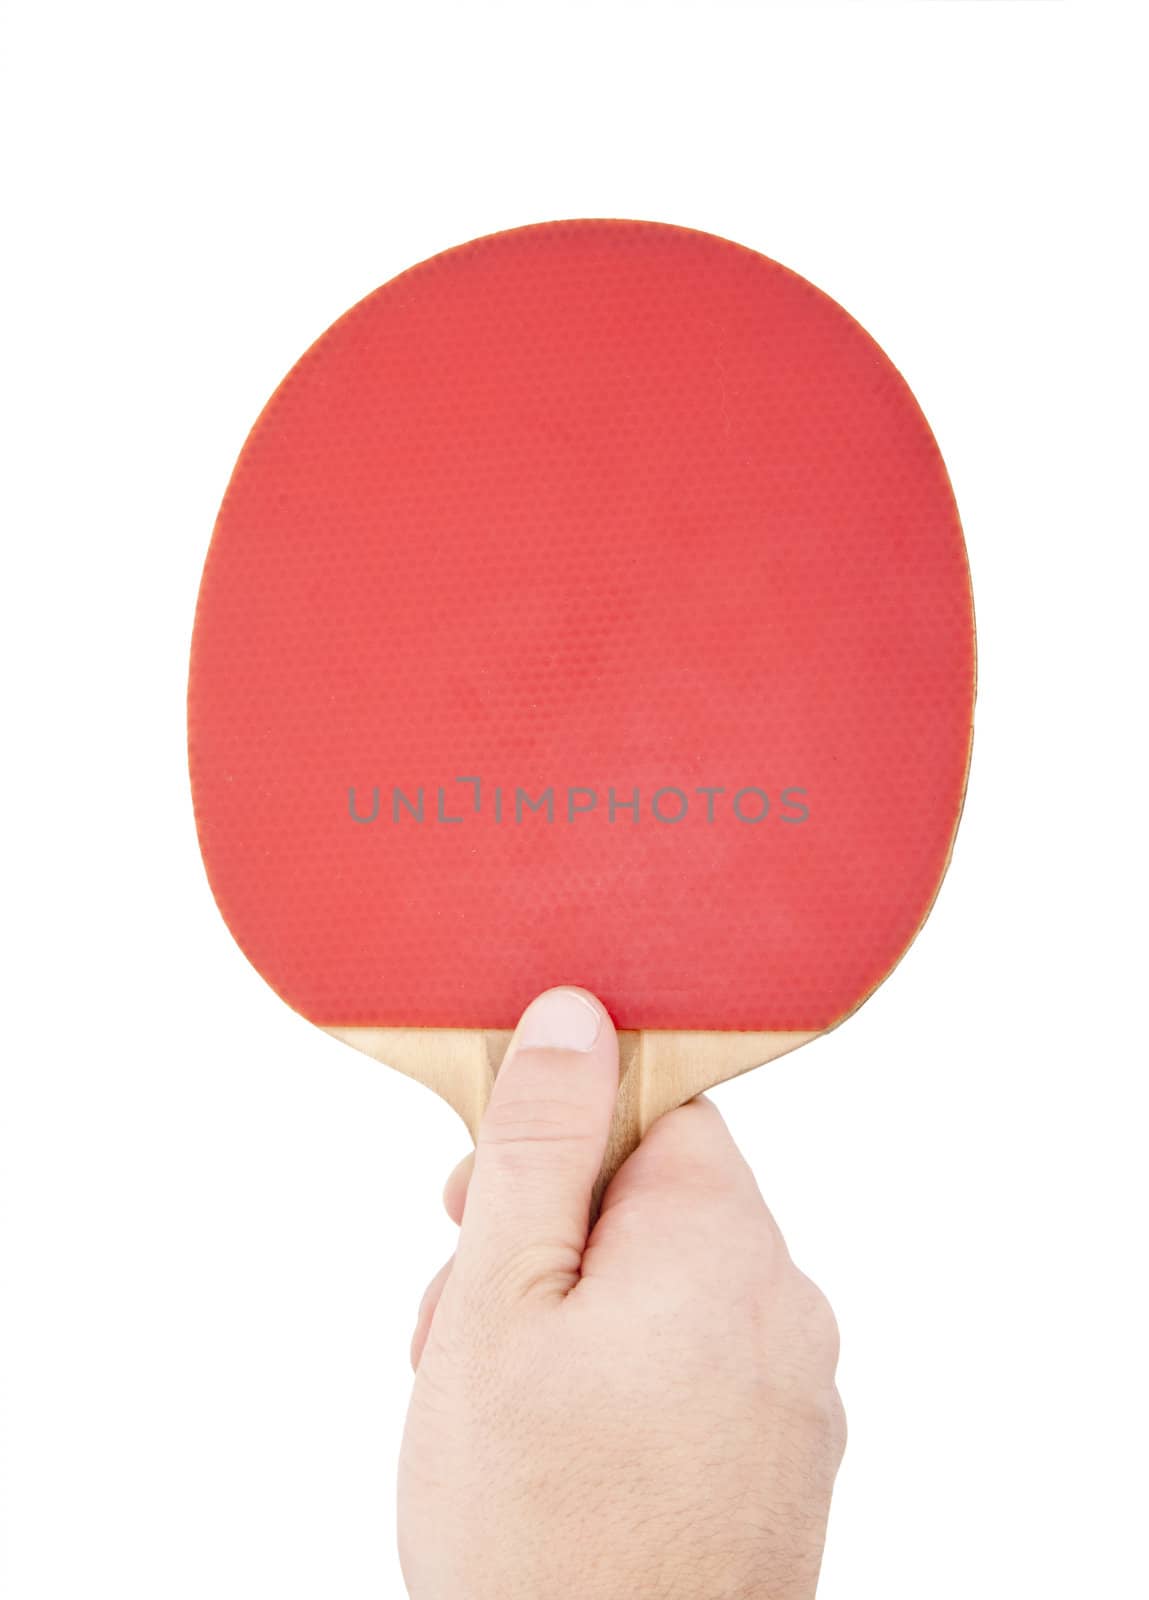 Red table tennis racket in the hand isolated